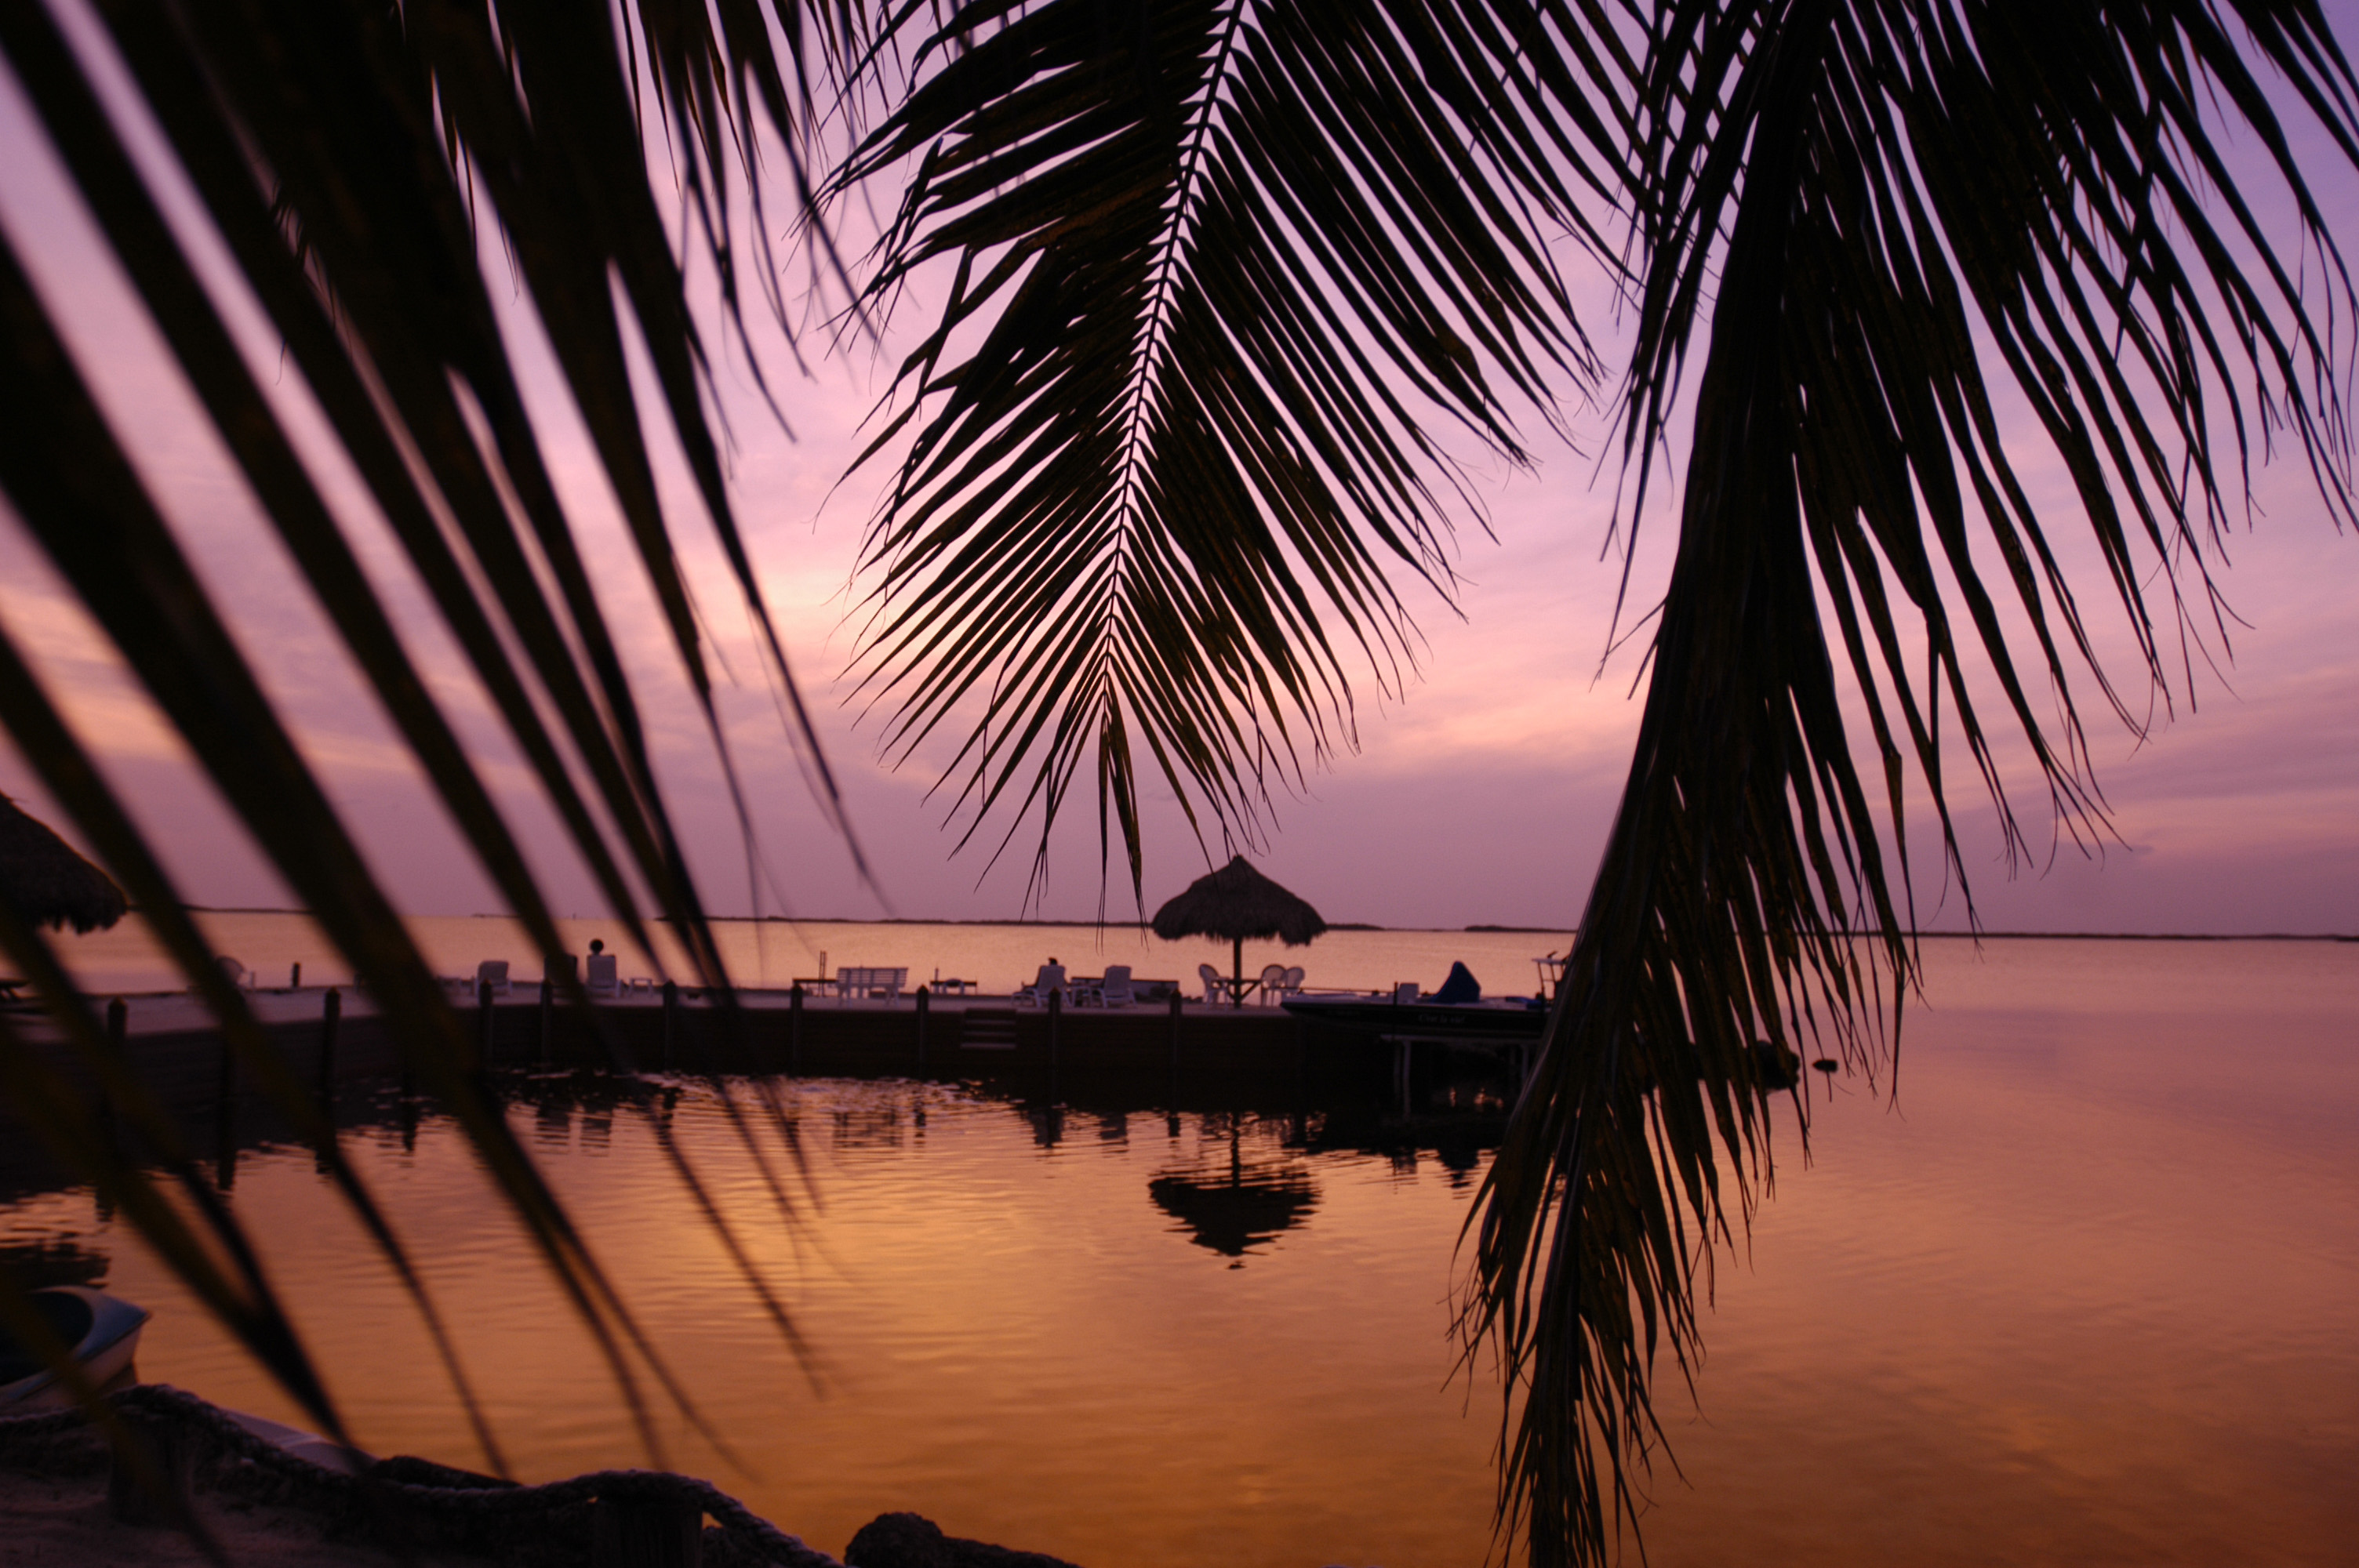 View of a pink and orange sunset over the water through palm tree leaves.